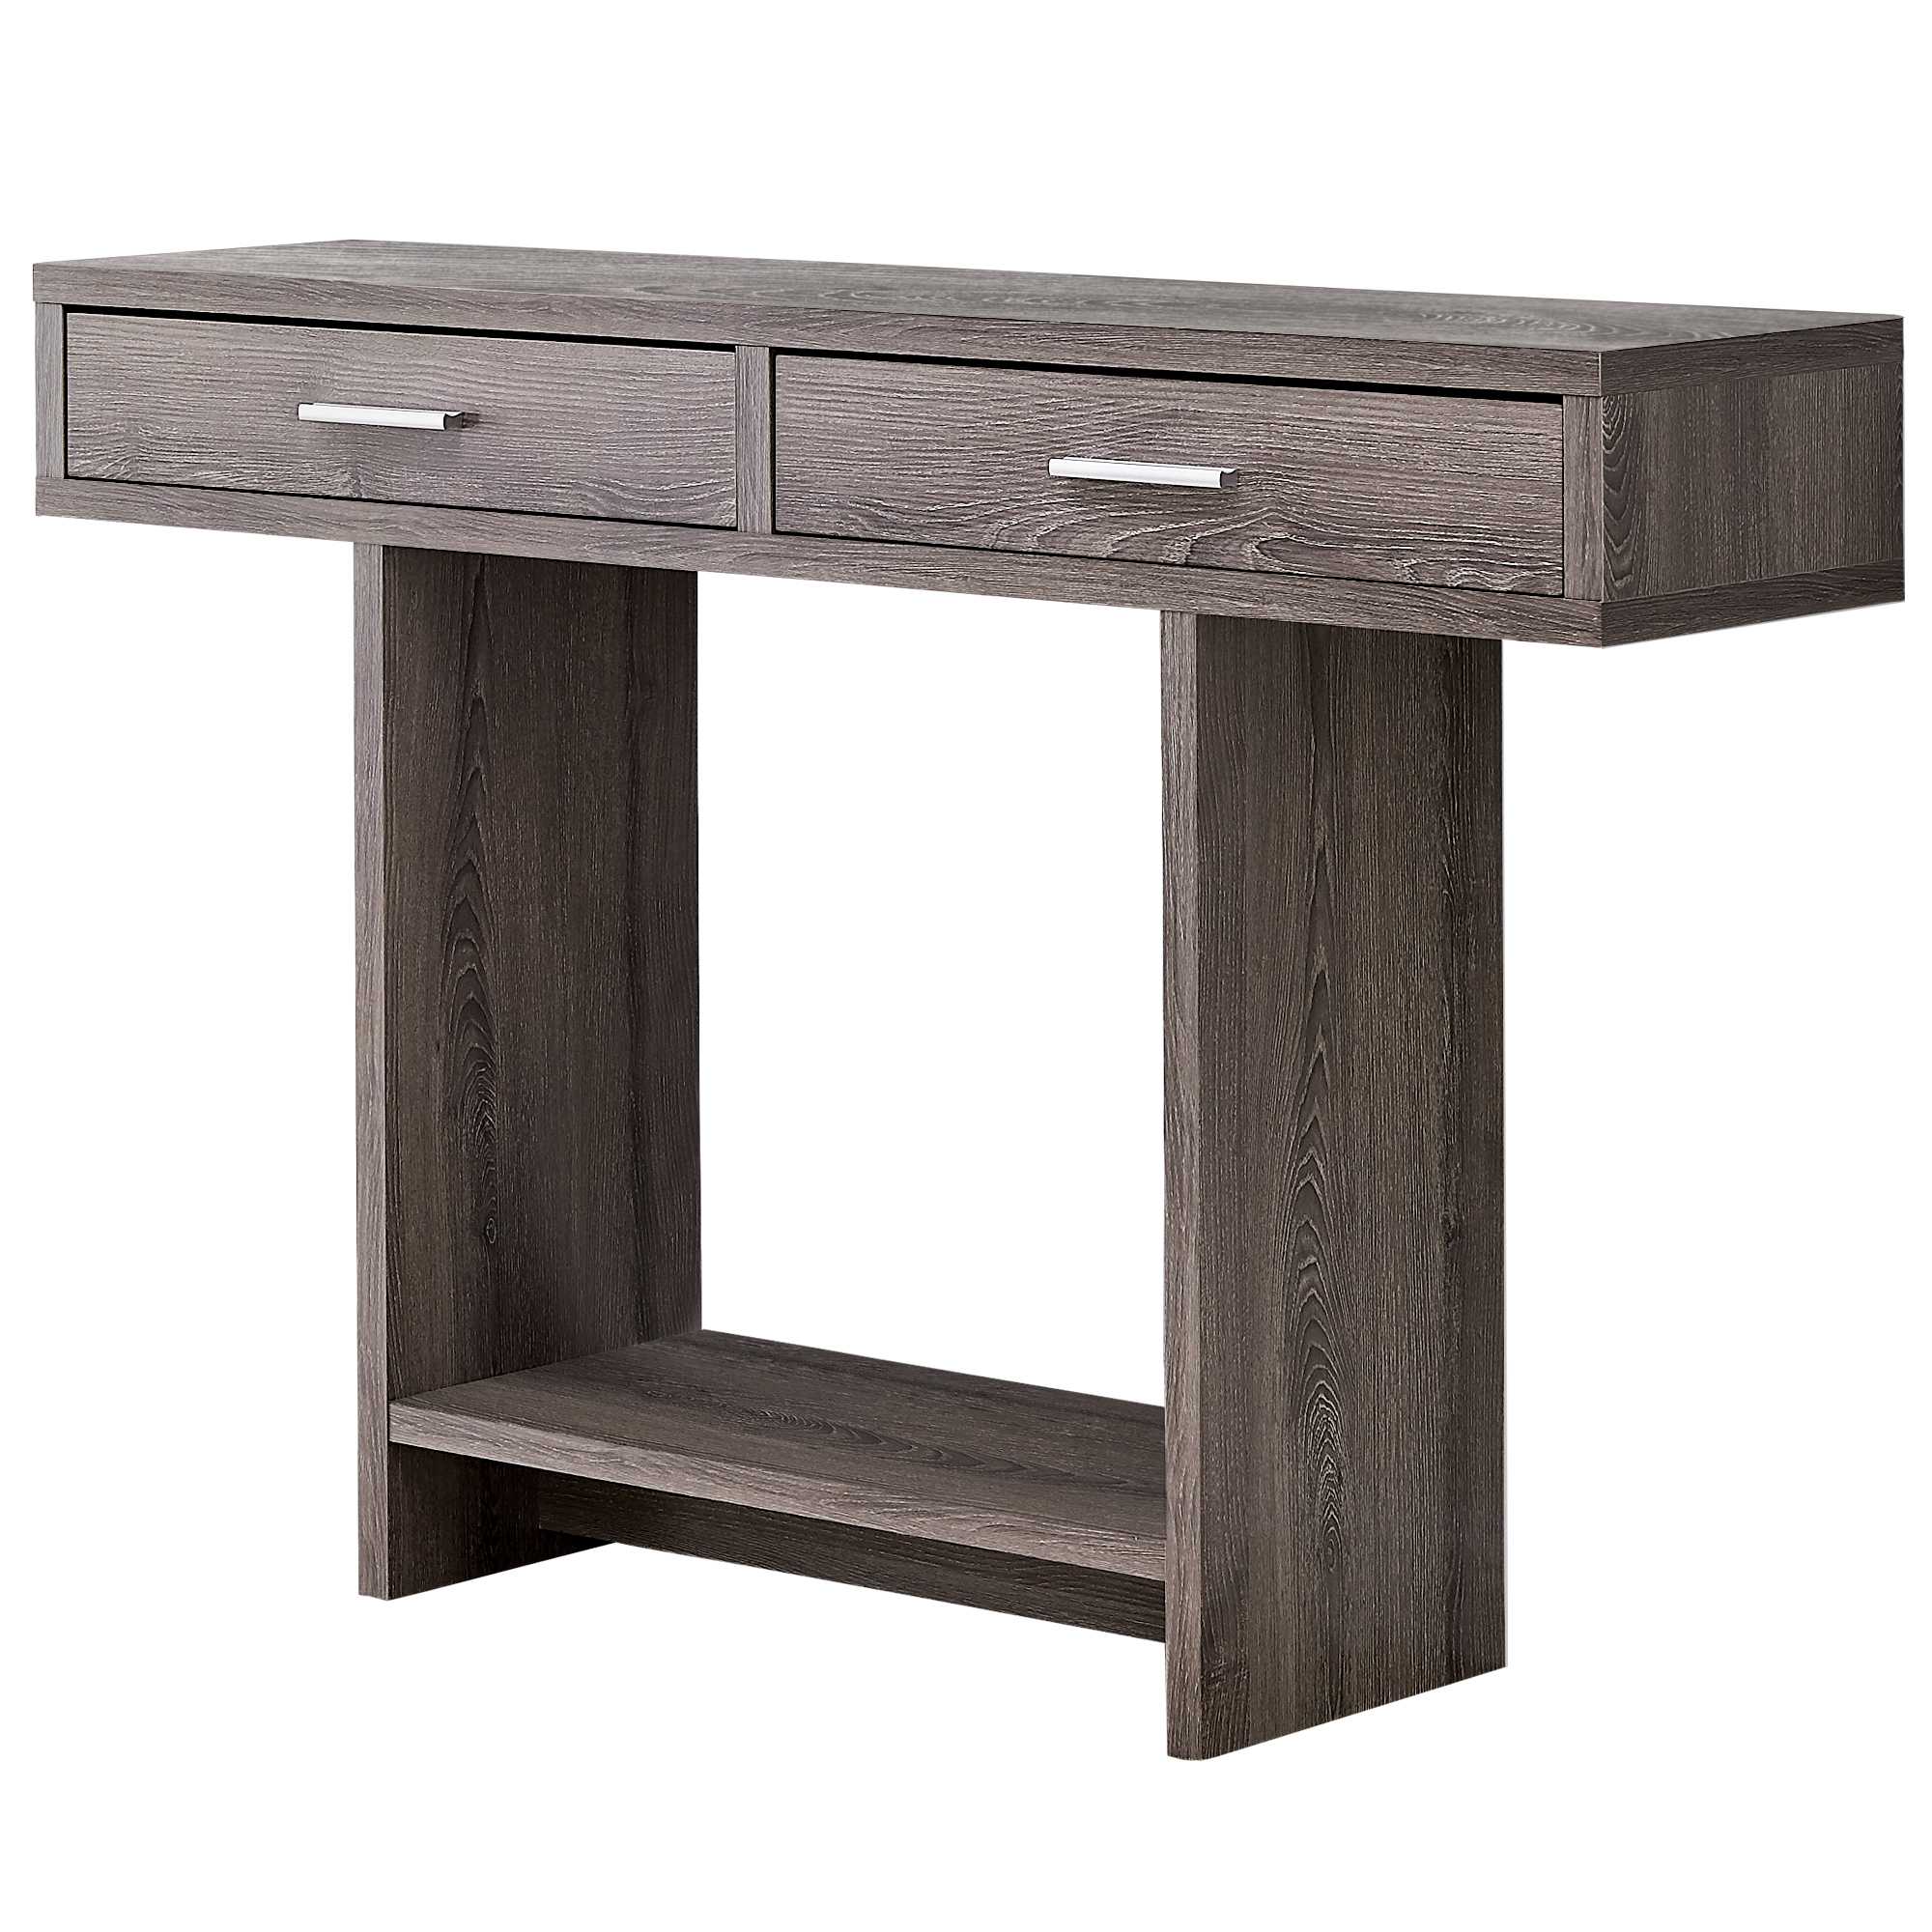 12.25" x 47.25" x 32" Dark Taupe With Drawers - Accent Table